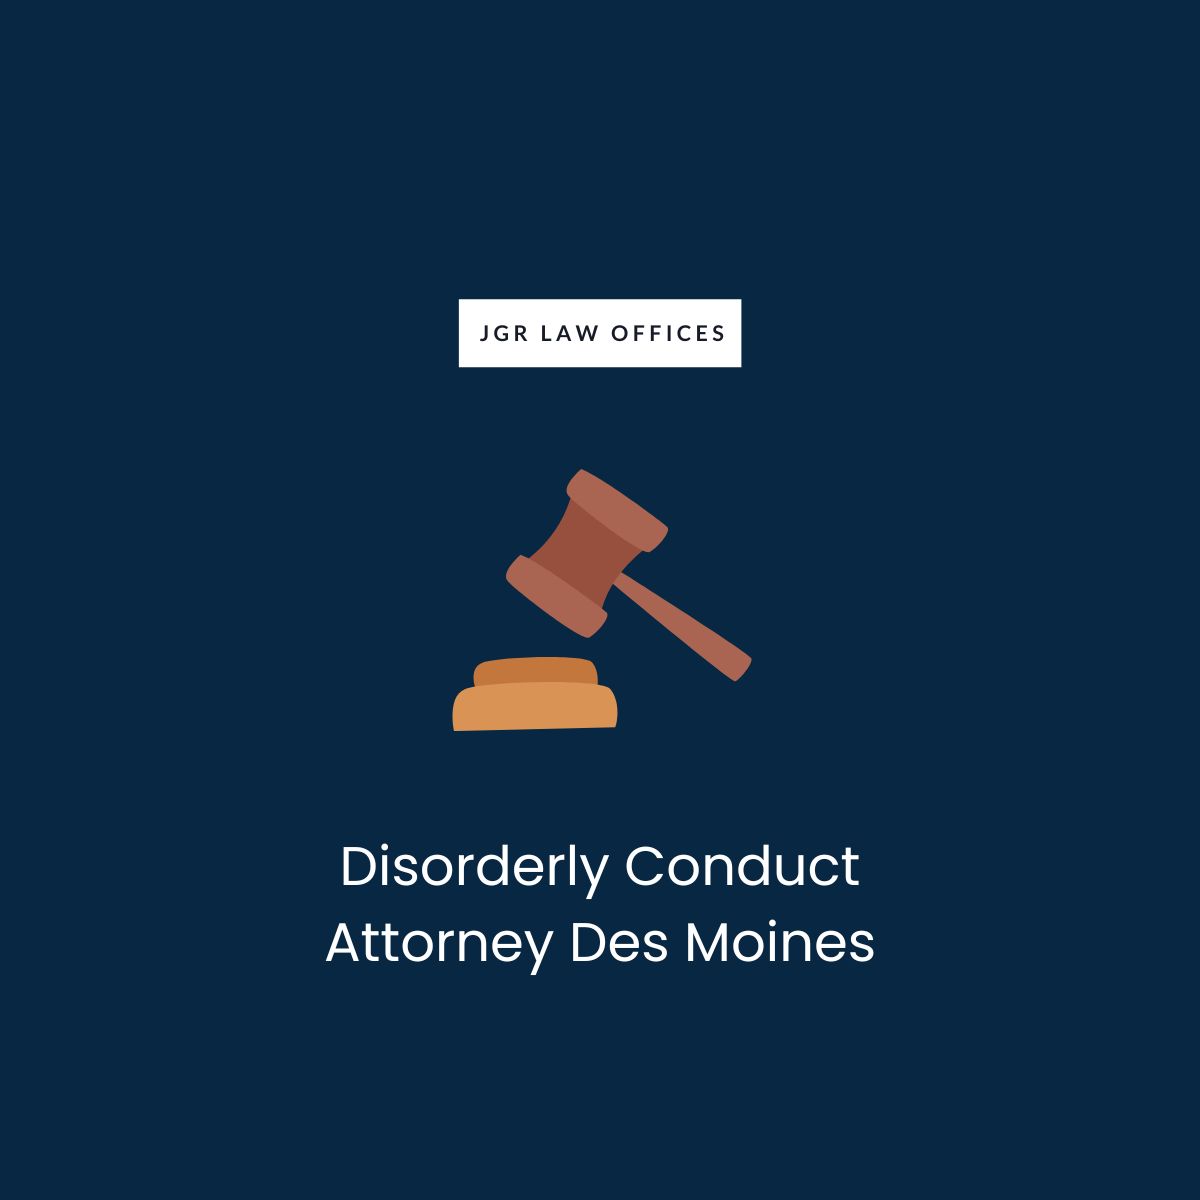 Disorderly Conduct Attorney Des Moines